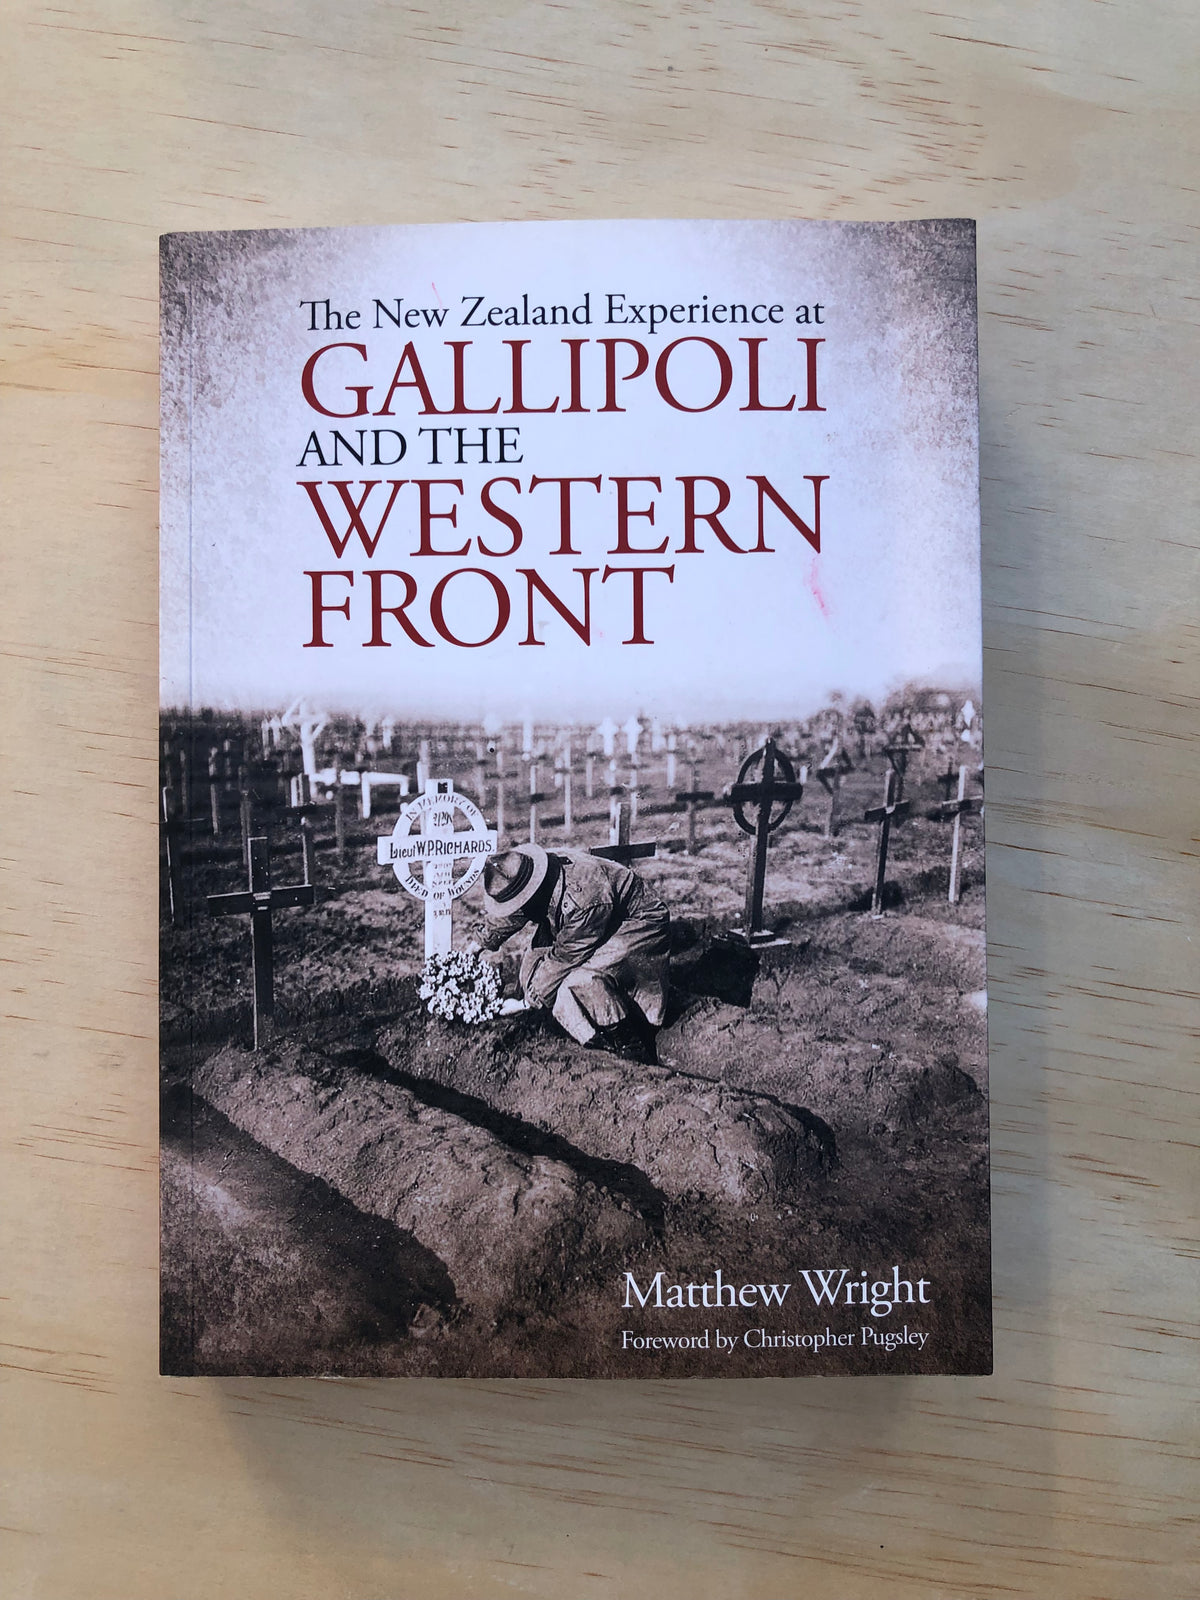 The New Zealand Experience at Gallipoli and the Western Front - Matthew Wright